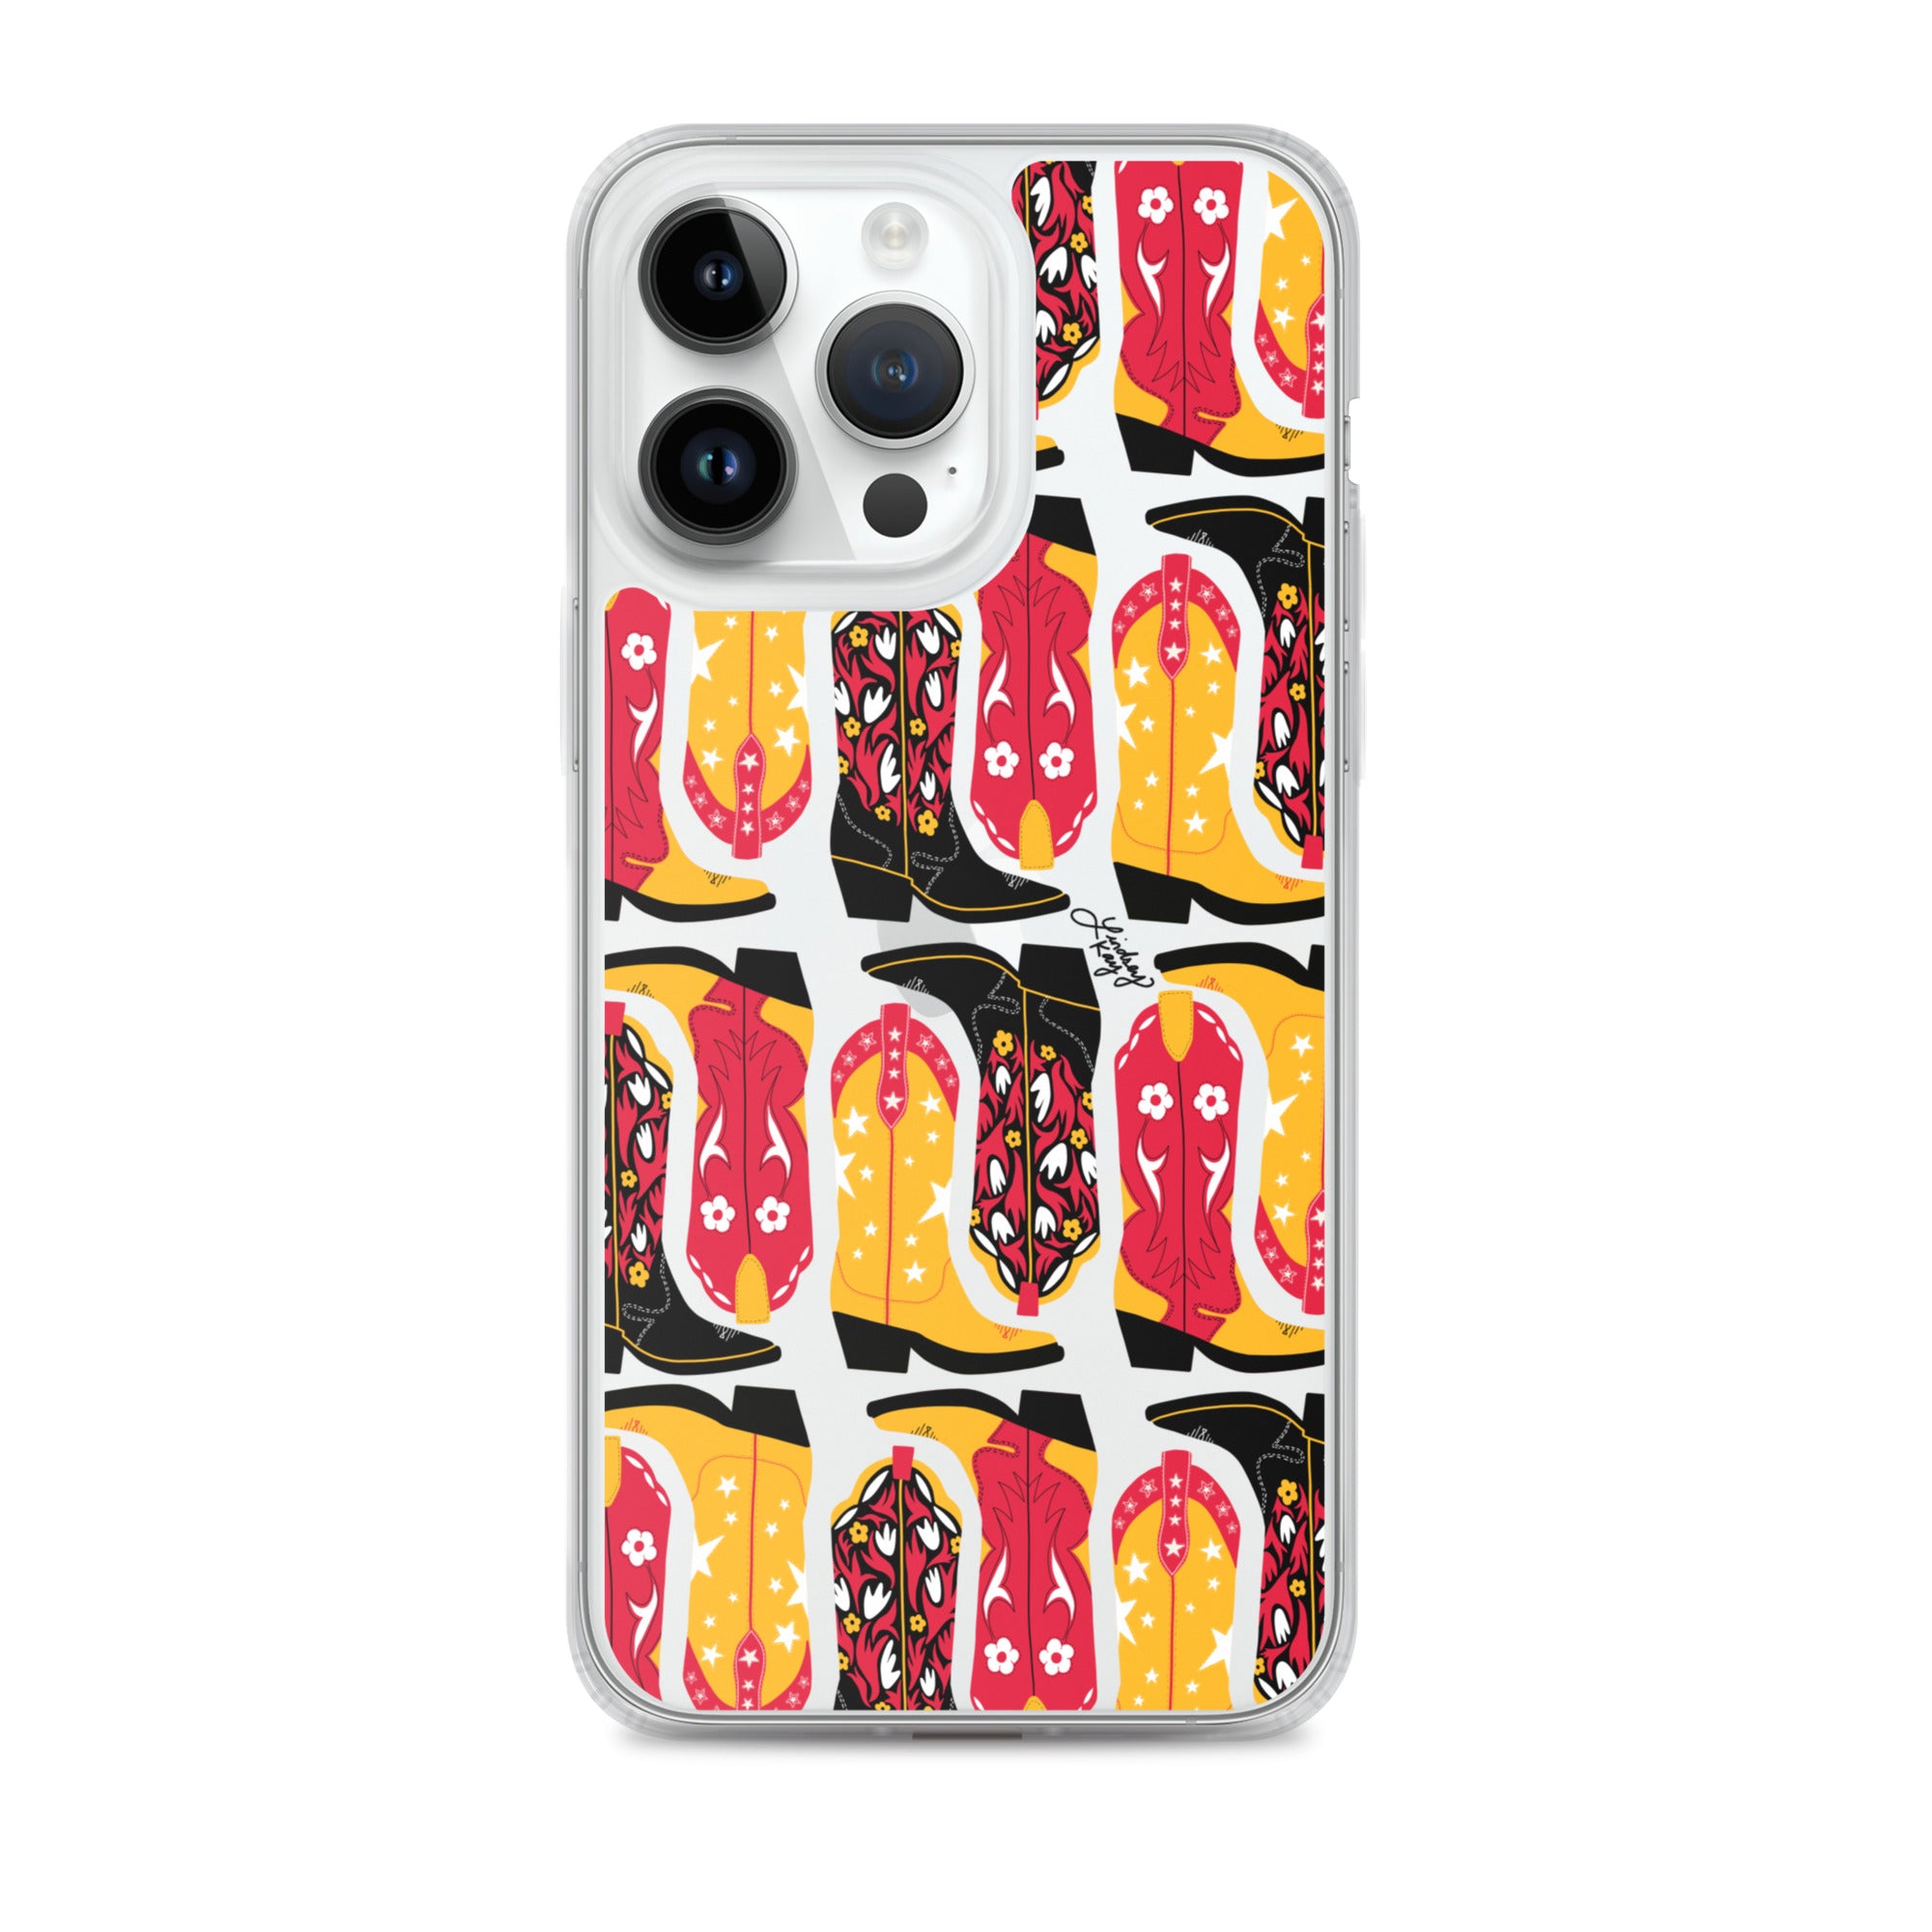 kansas city chiefs iphone case clear phone-case mobile accessories cute trendy super bowl cowboy boots taylor swift swiftie red yellow black midwest KC switftie football lindsey kay collective 